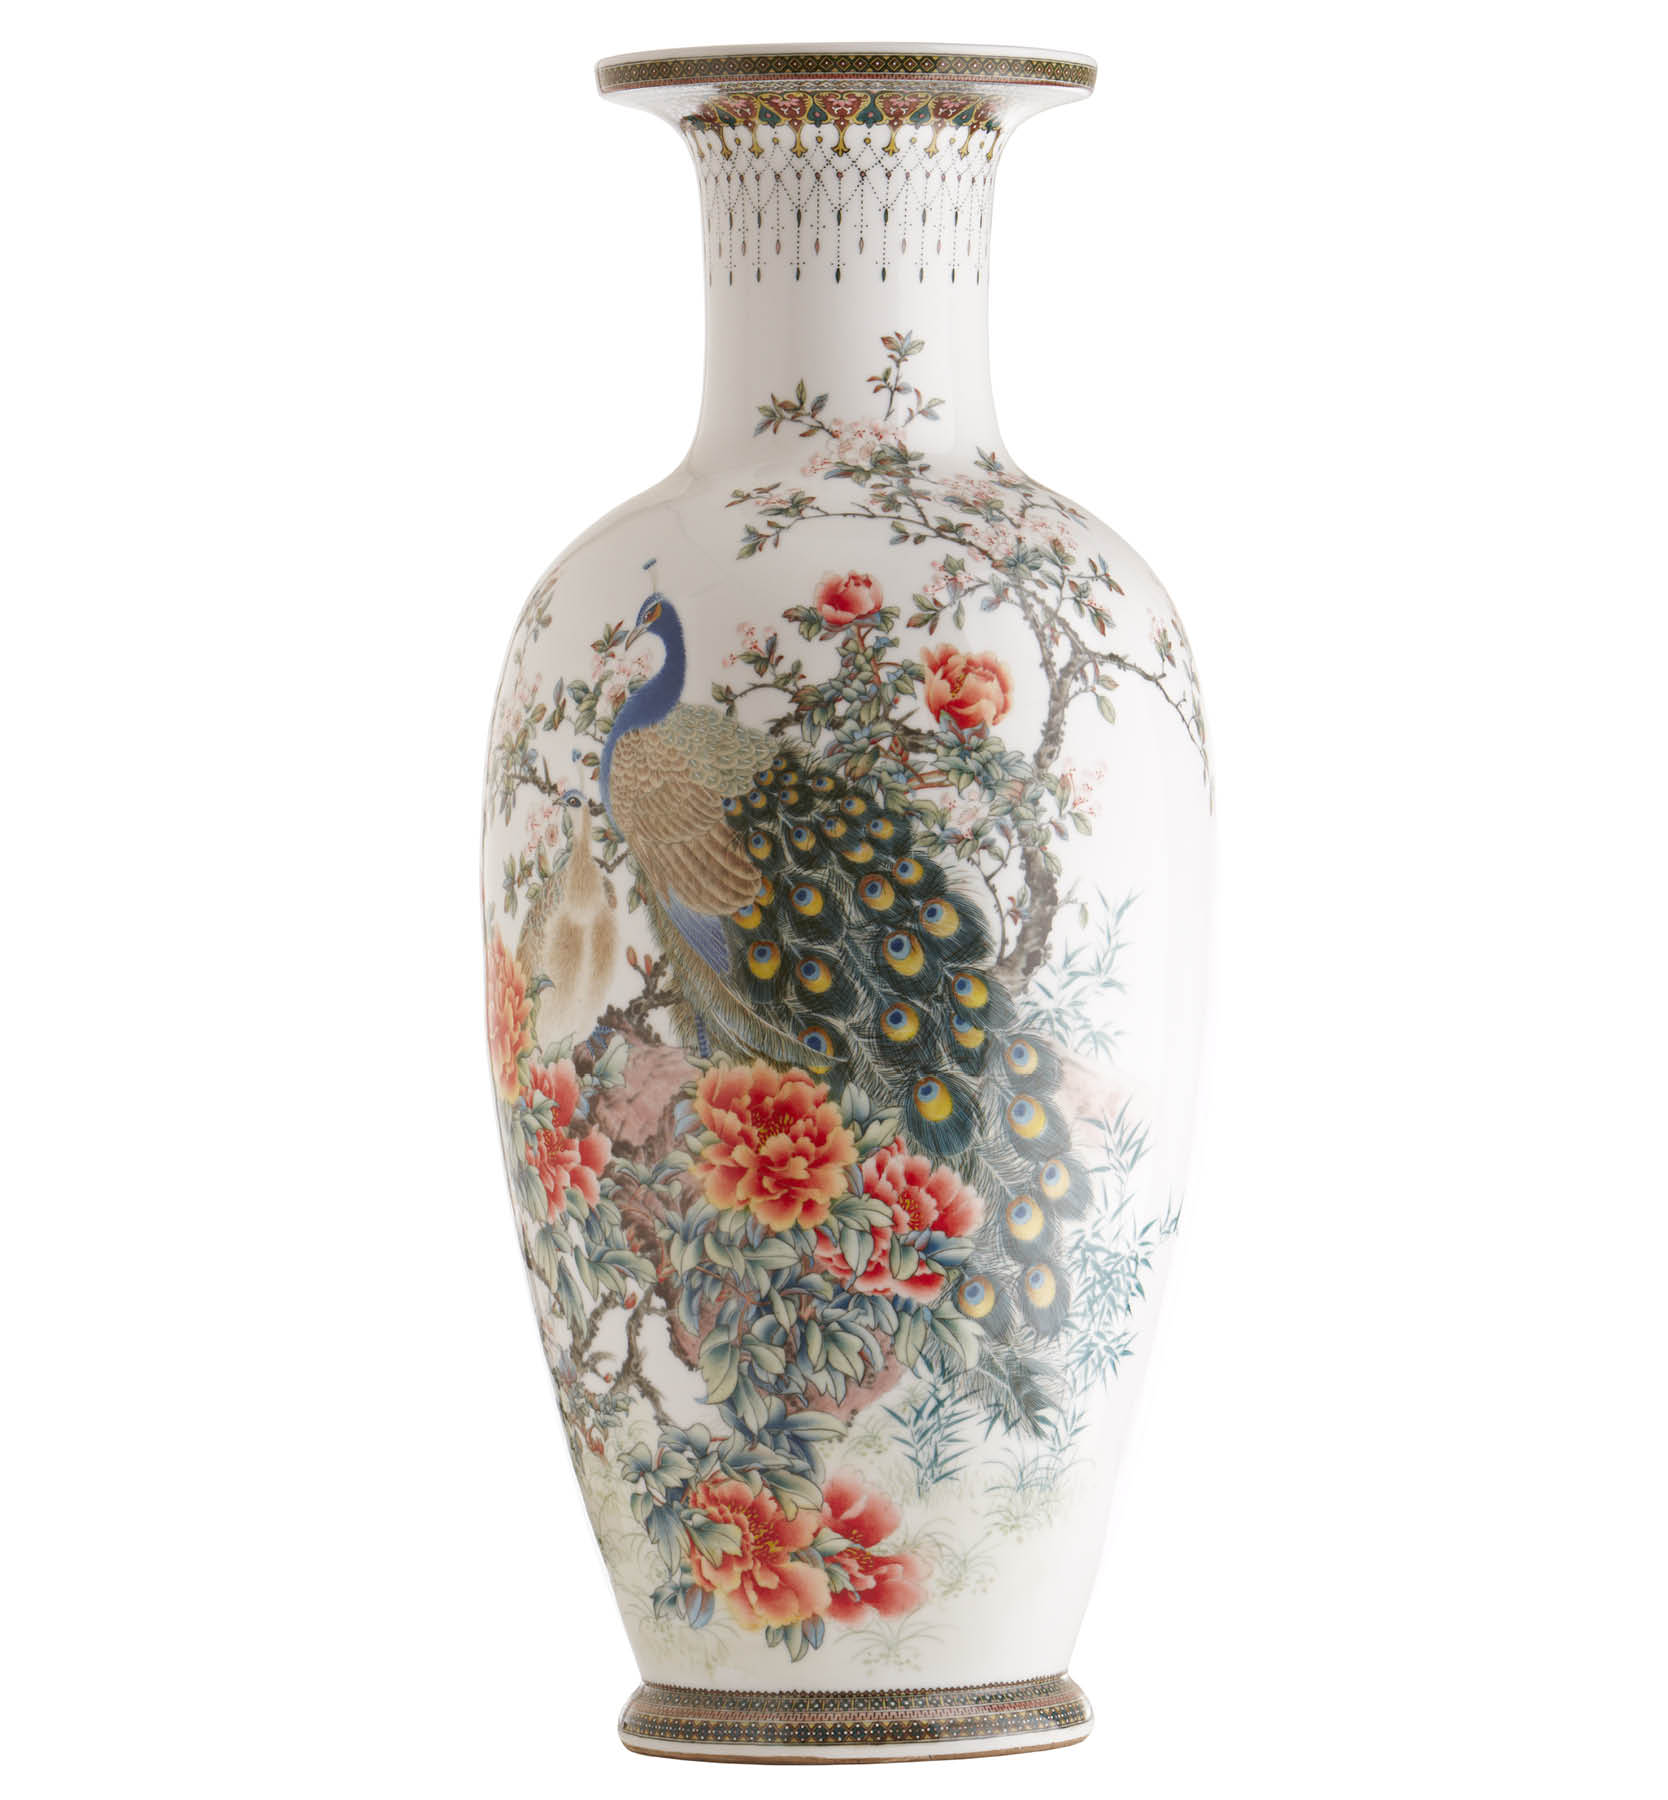 Chinese Interior Art Porcelain Global Supply Gennep